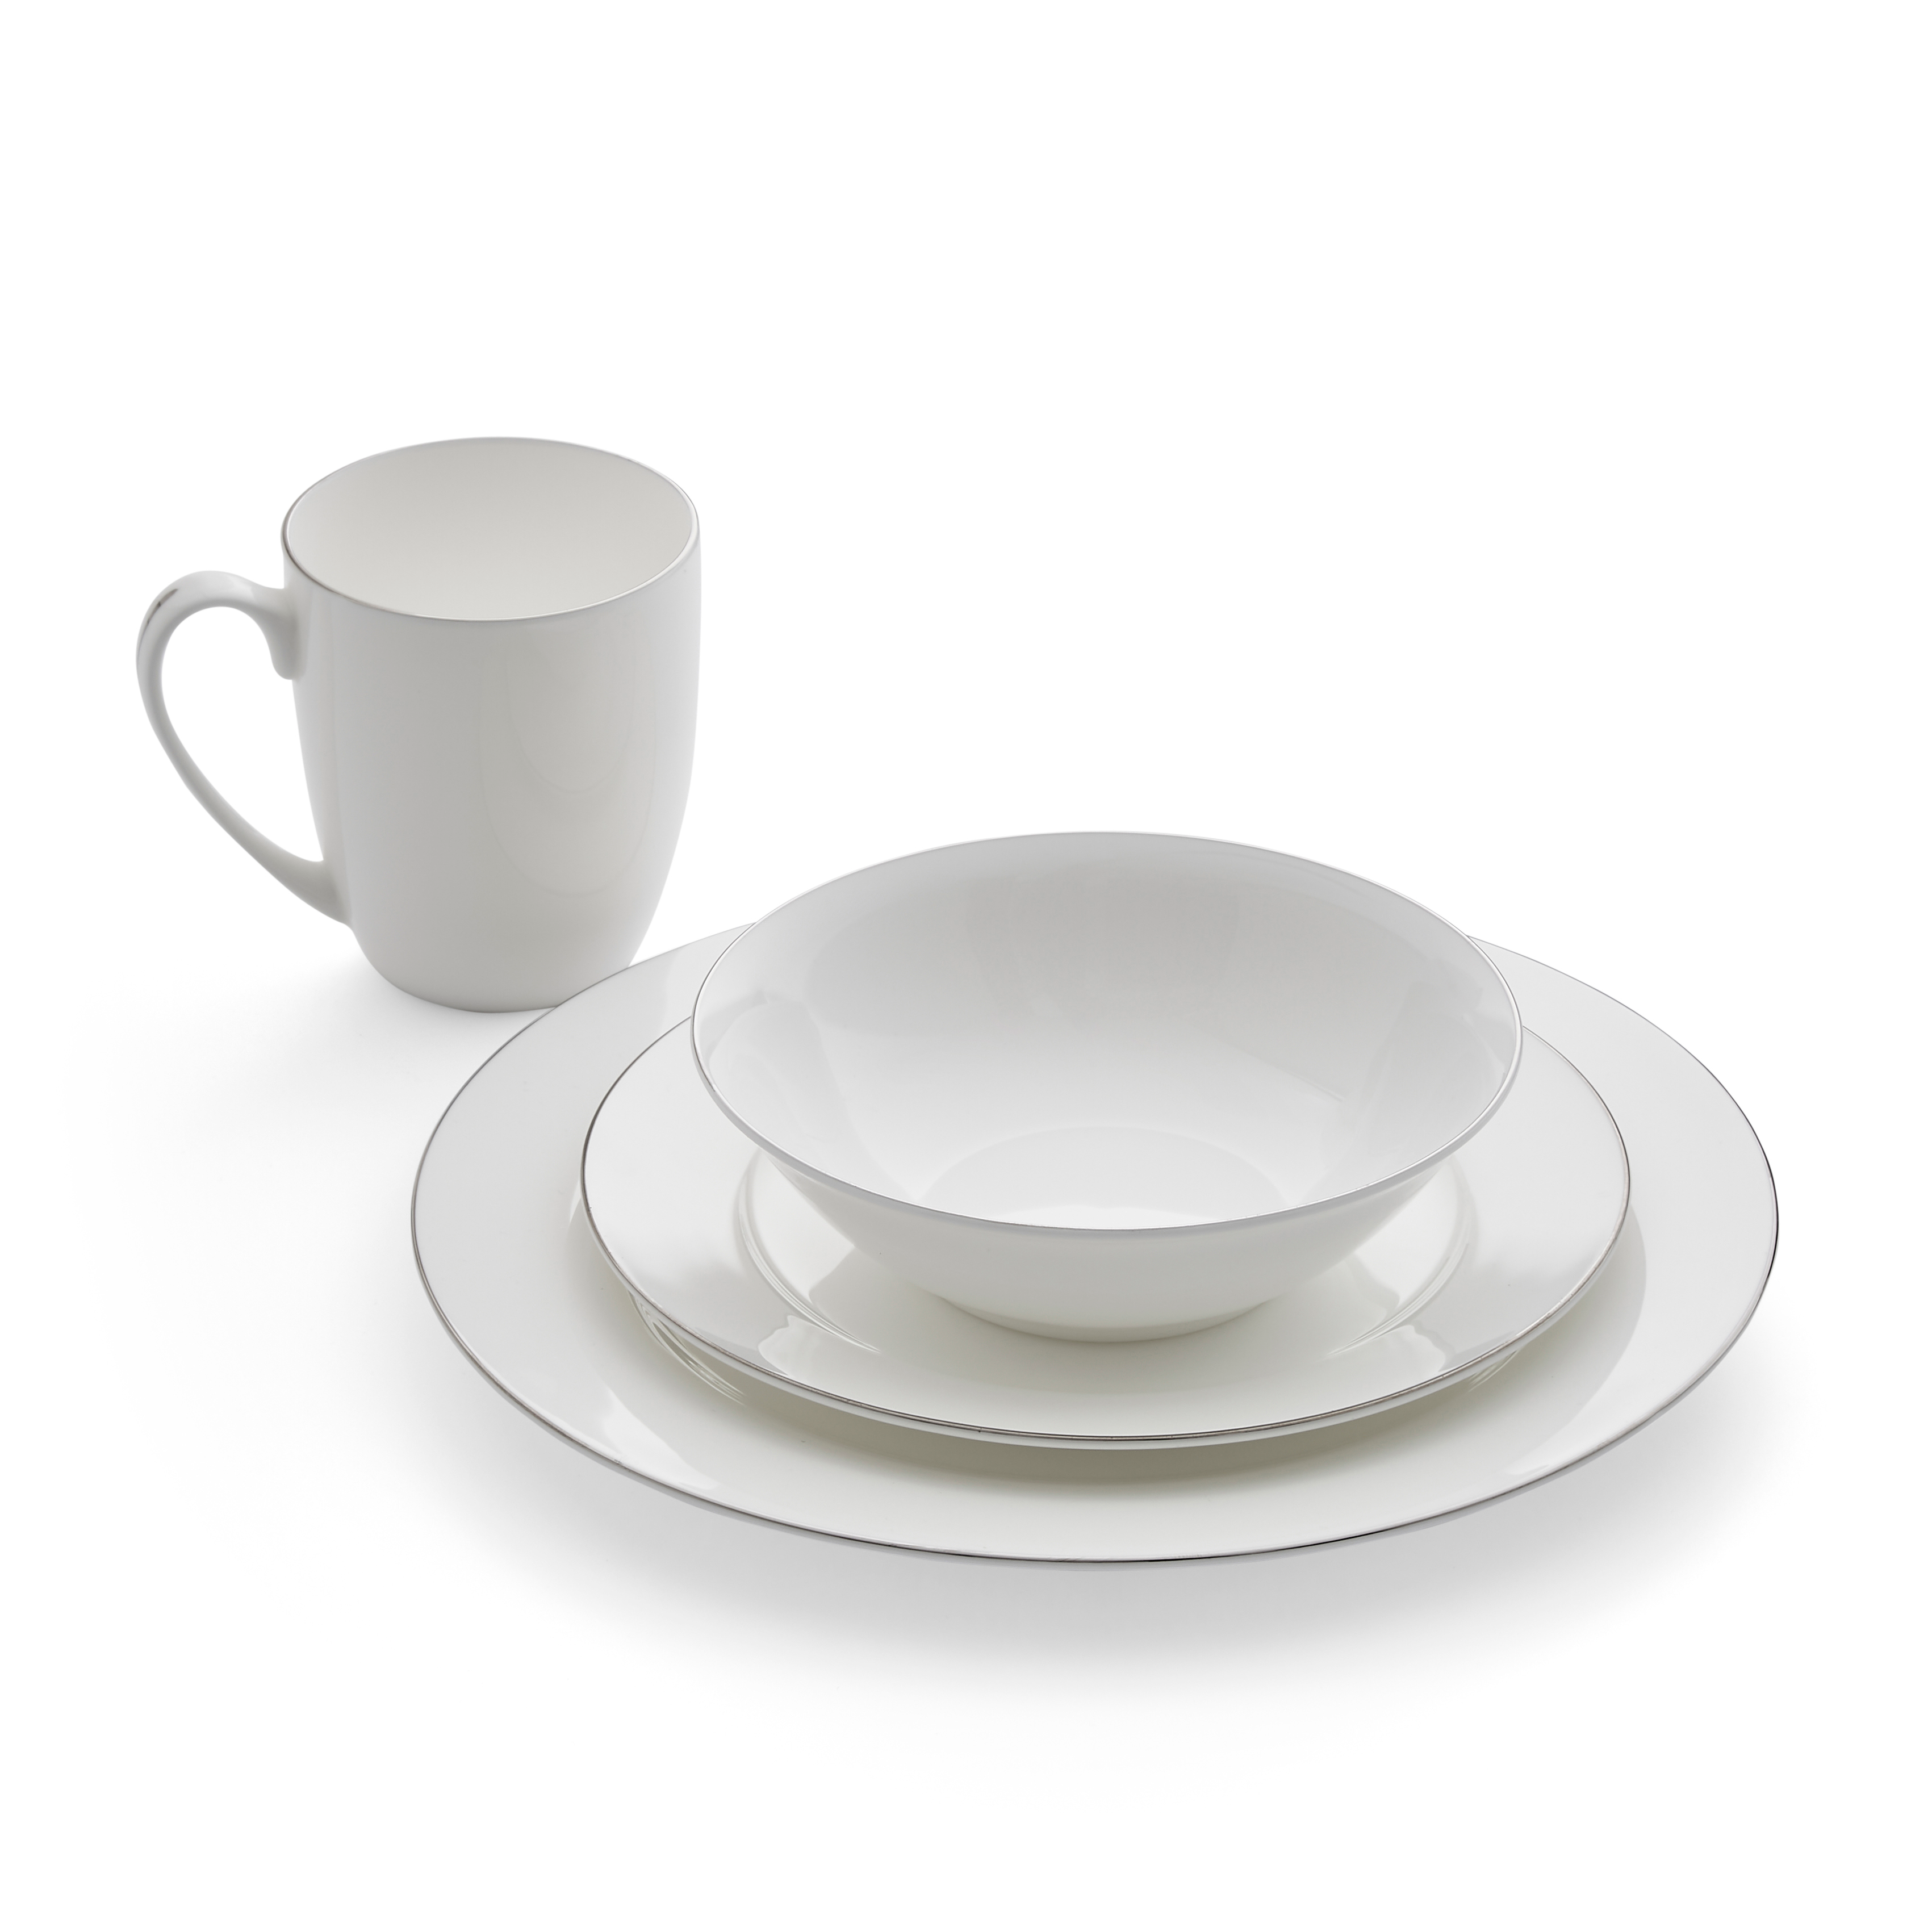 Royal Worcester Bone China 16 Pieces Dinner Set with Serendipity Pattern -White